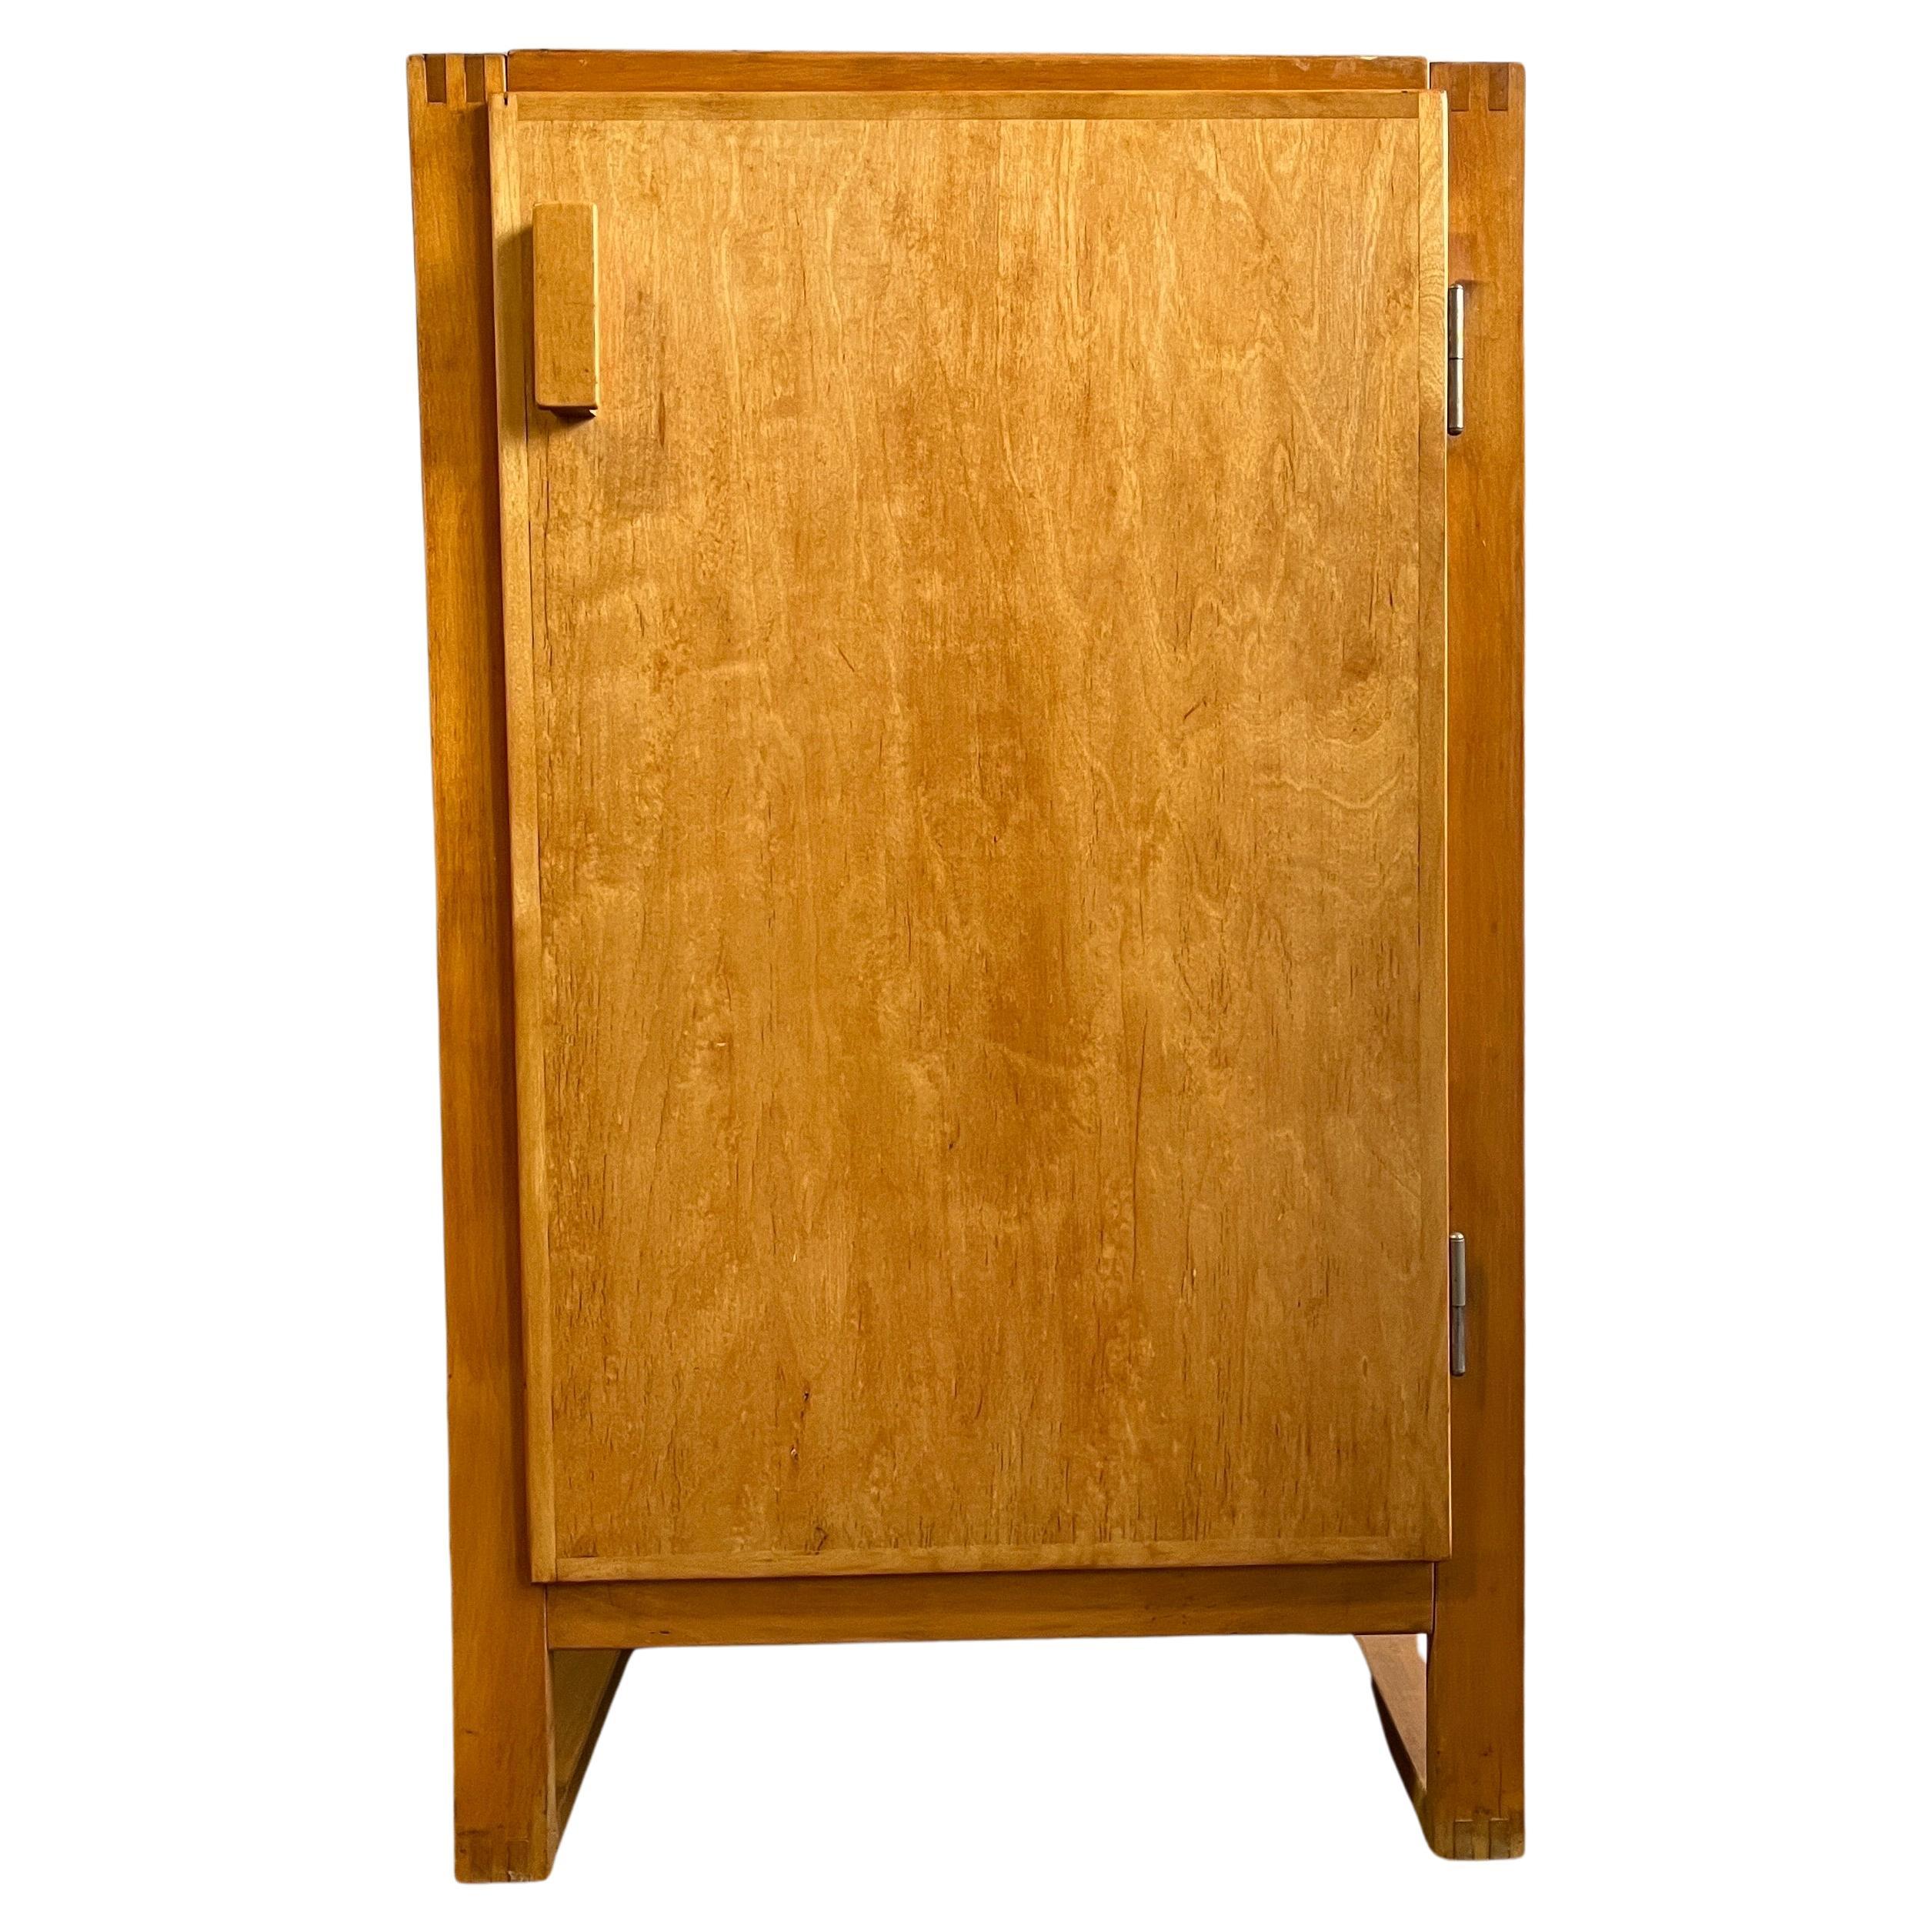 Midcentury cabinet featuring an internal middle shelf on sled base. Beautiful finger joints and brass screw details with original patina. Very solid handsome piece that would pair well with Mccobb, Eames, or Aalto designs.

    